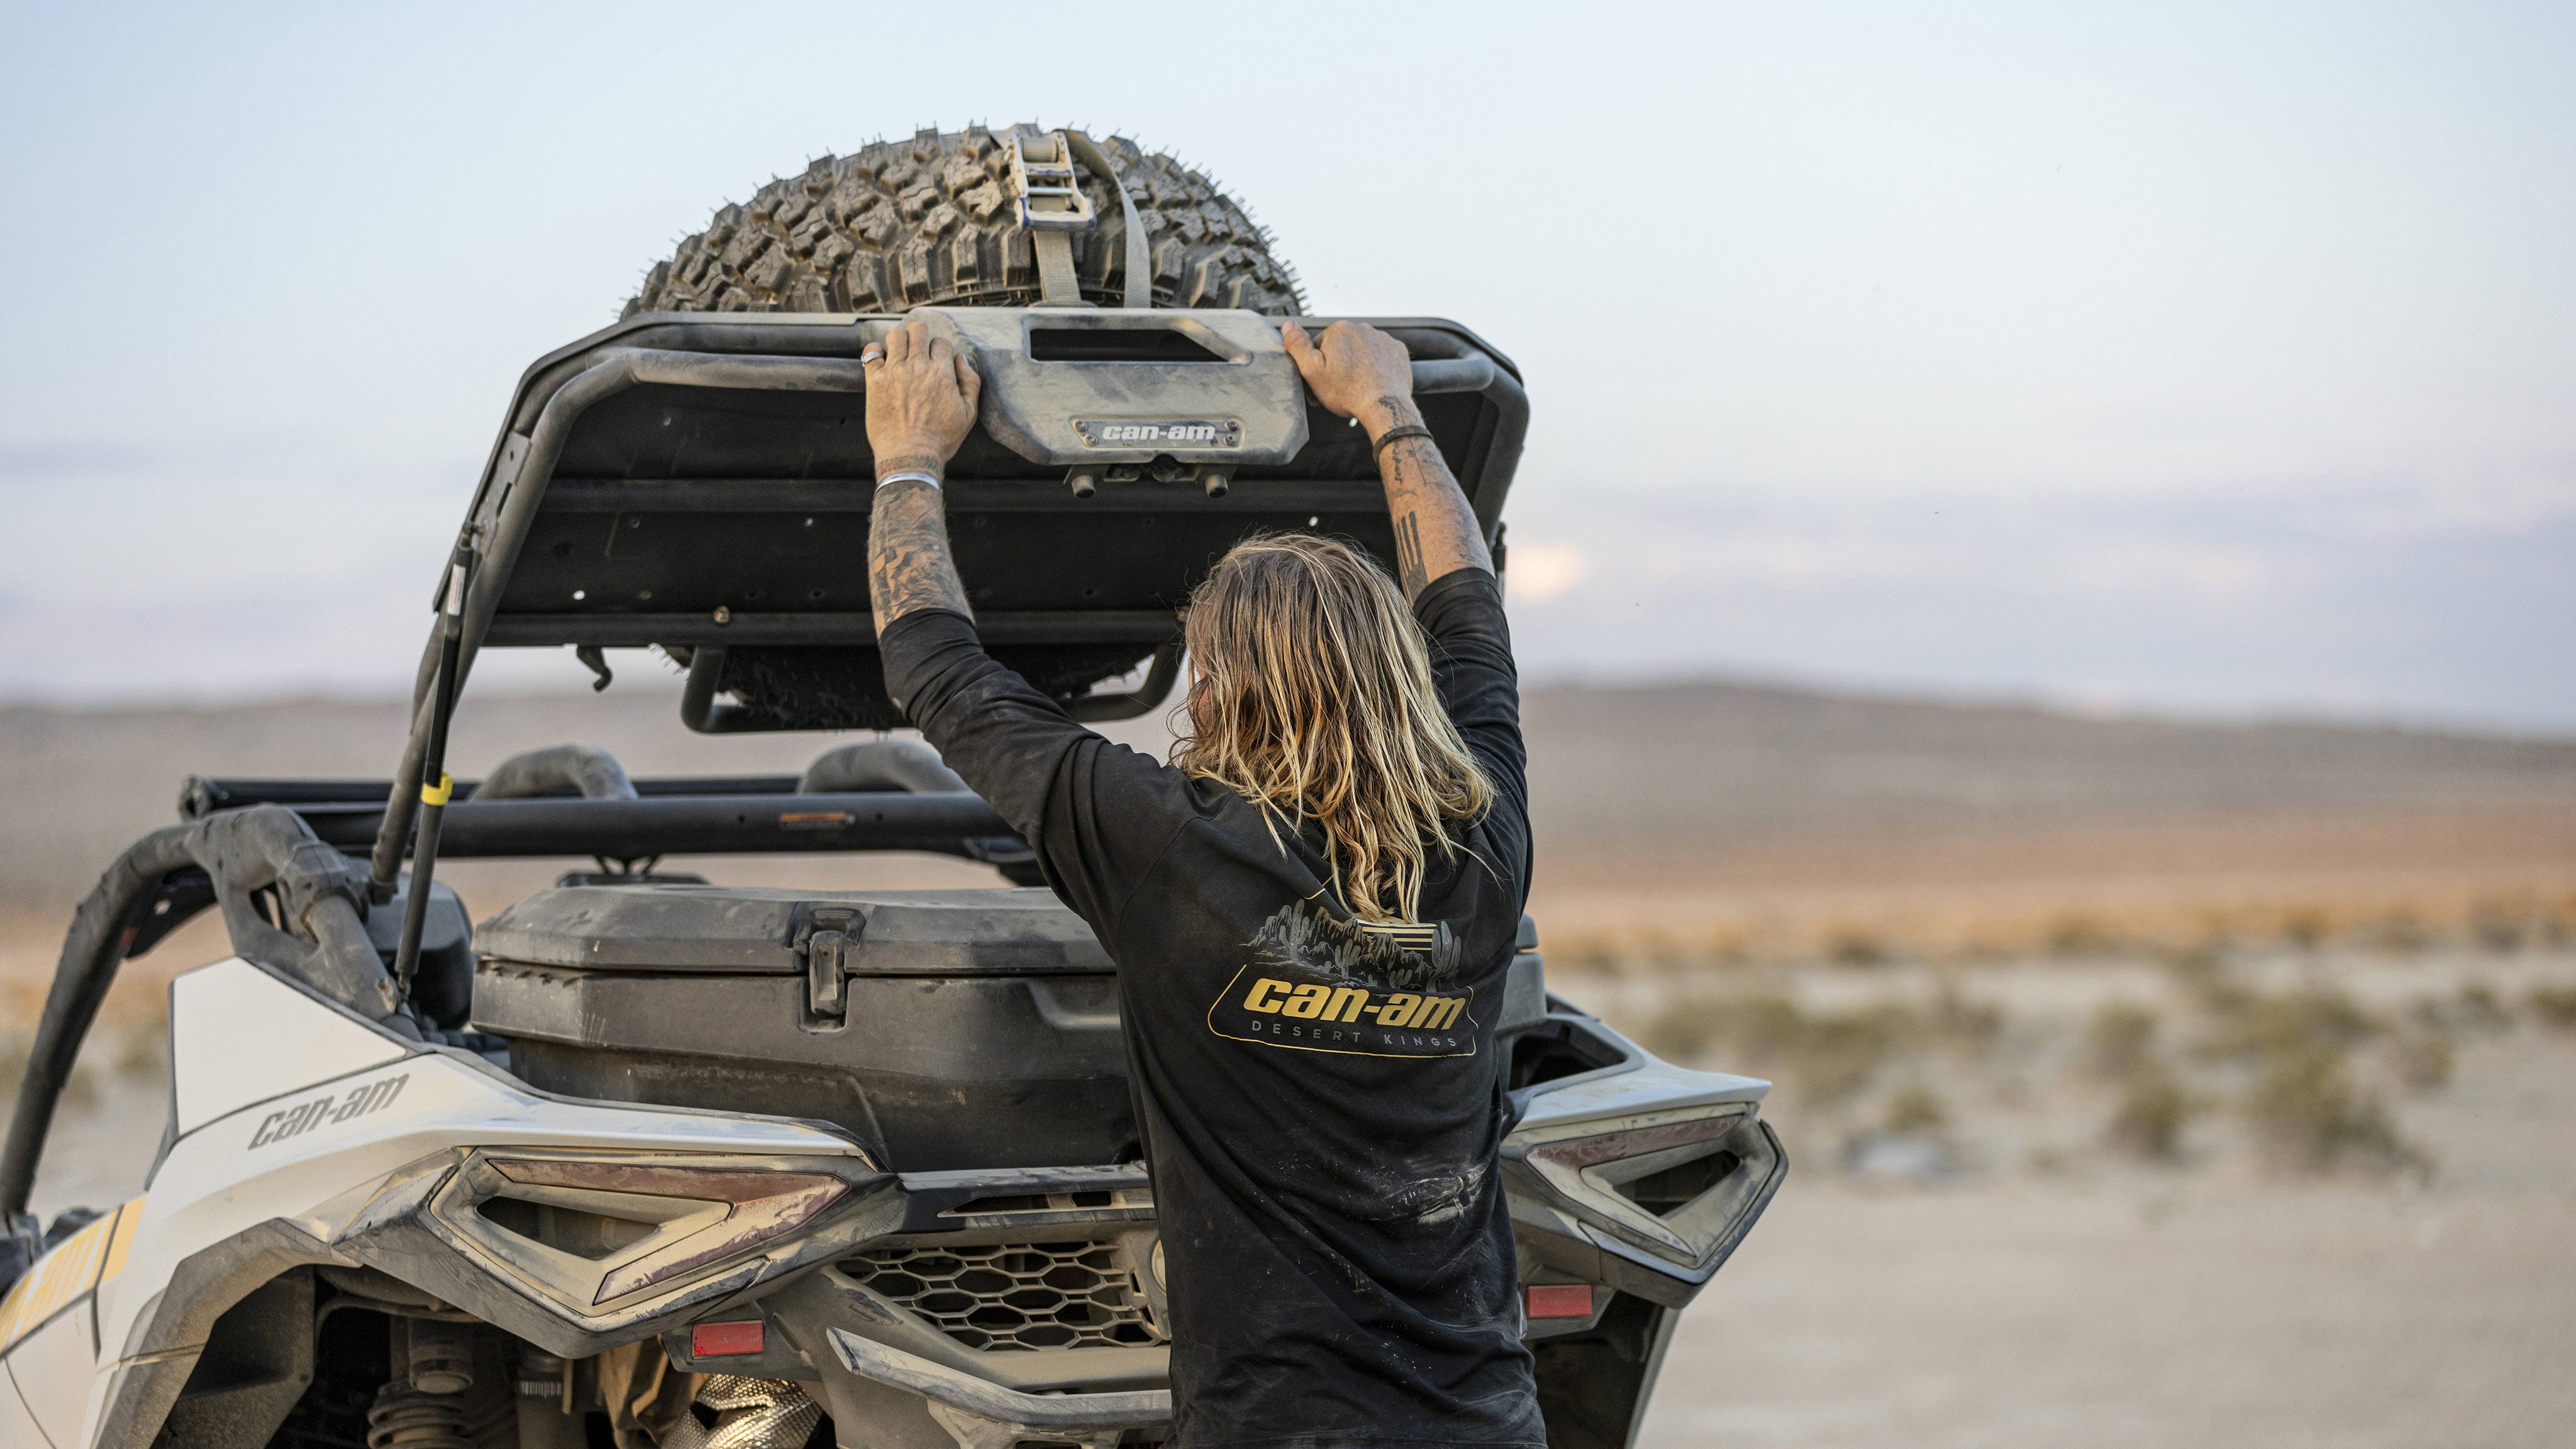 Can-Am ambassador Terry Madden lifting the trunk of his Maverick R SxS to access the LinQ cargo box